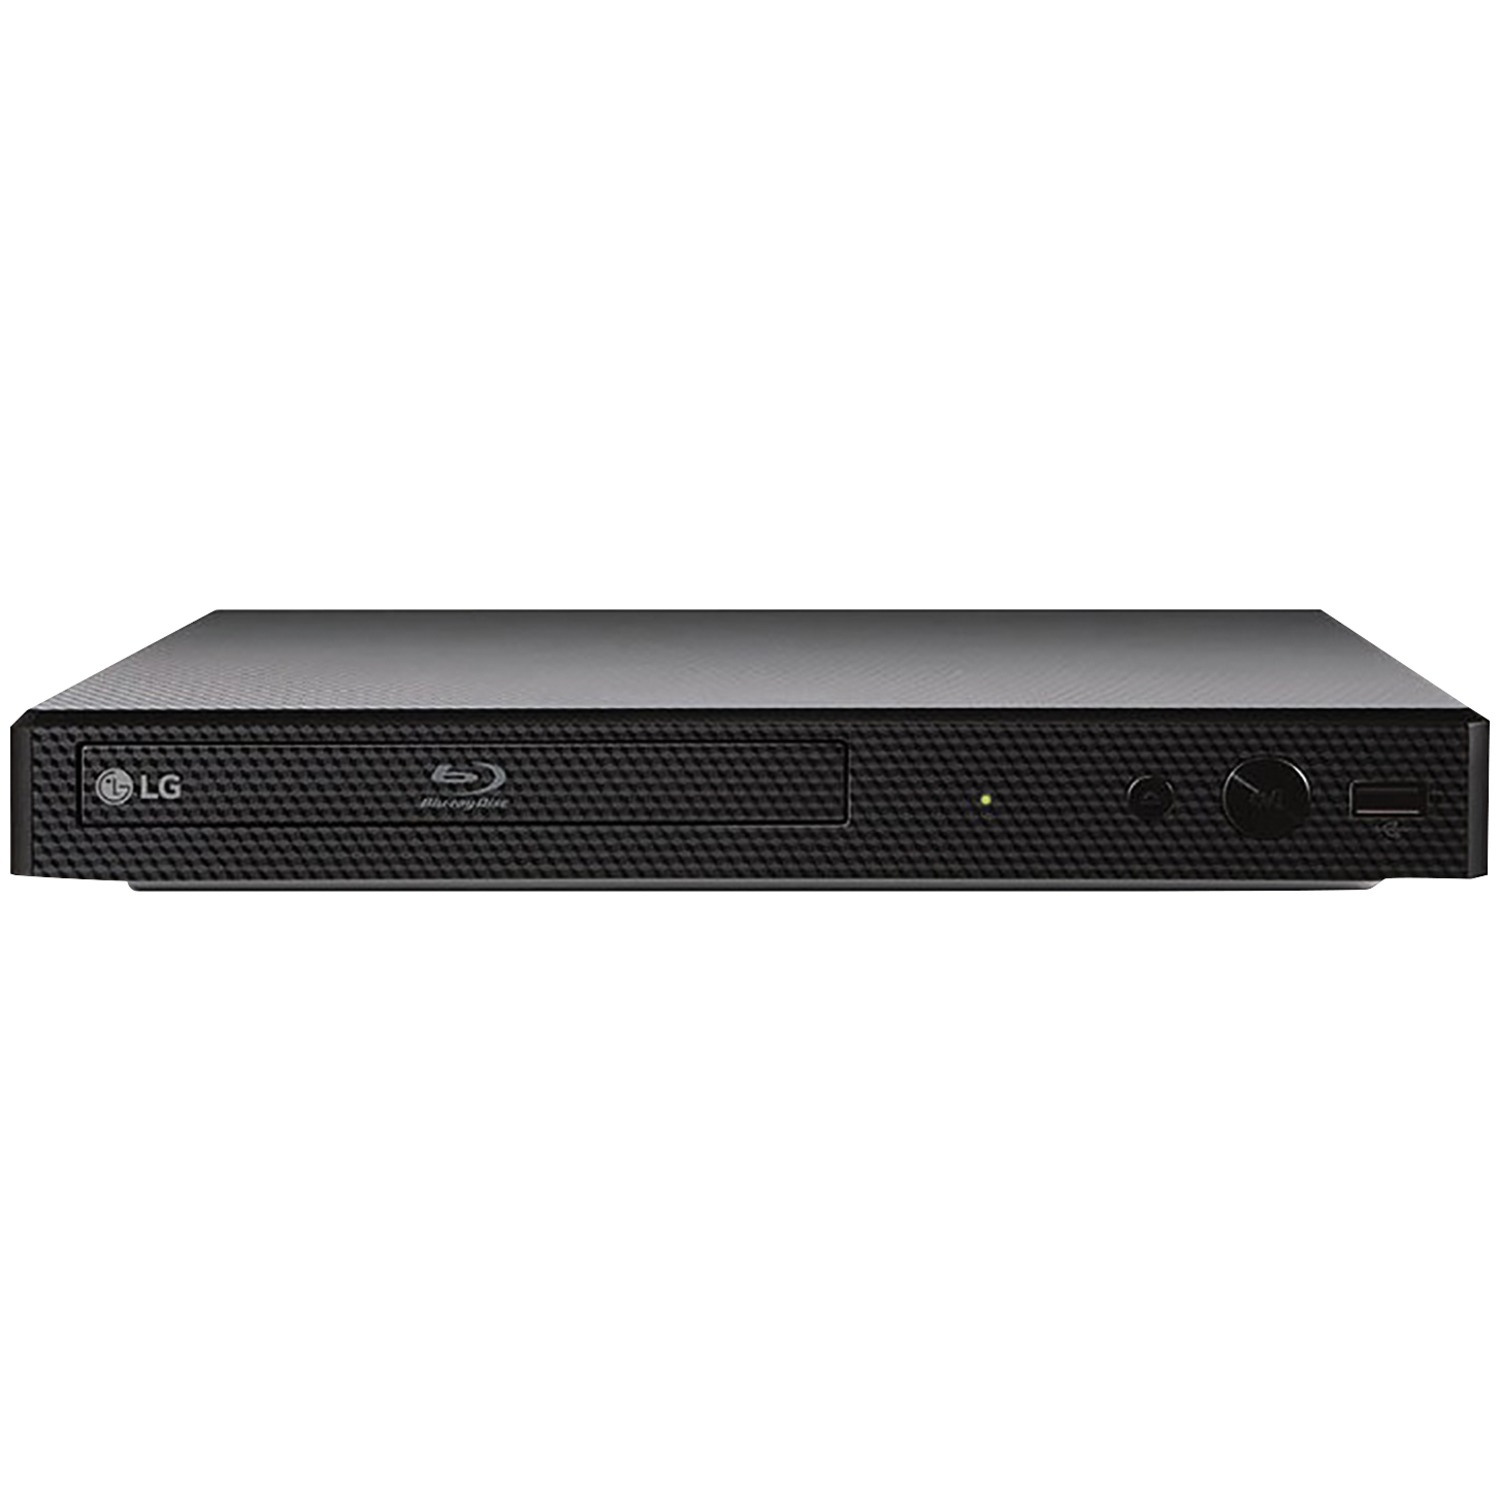 LG BP350 Blu-ray Player with Streaming Services and Built-in Wi-Fi - image 1 of 4